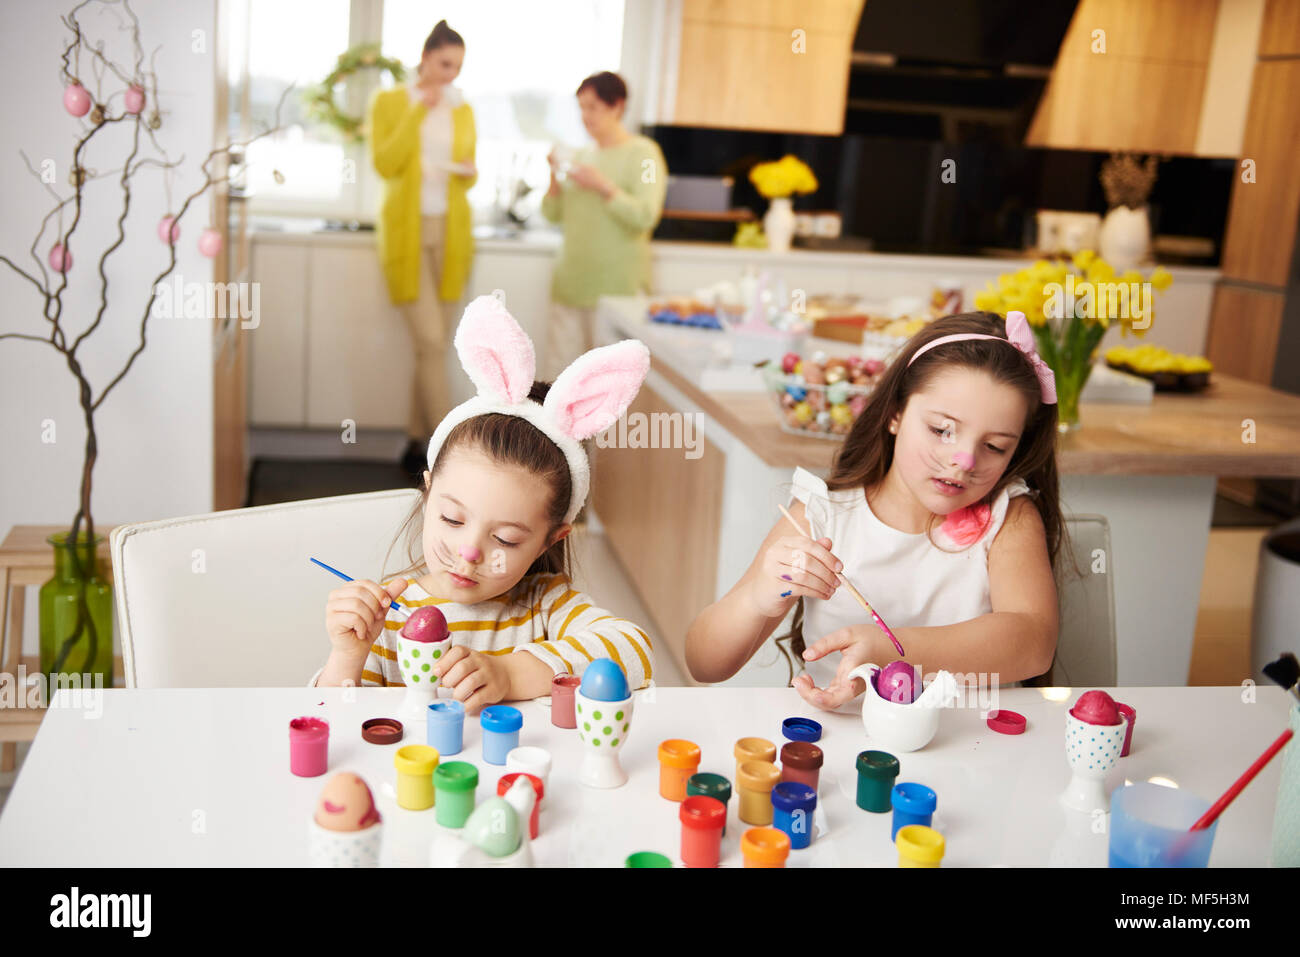 Sisters sitting at table painting Easter eggs Stock Photo